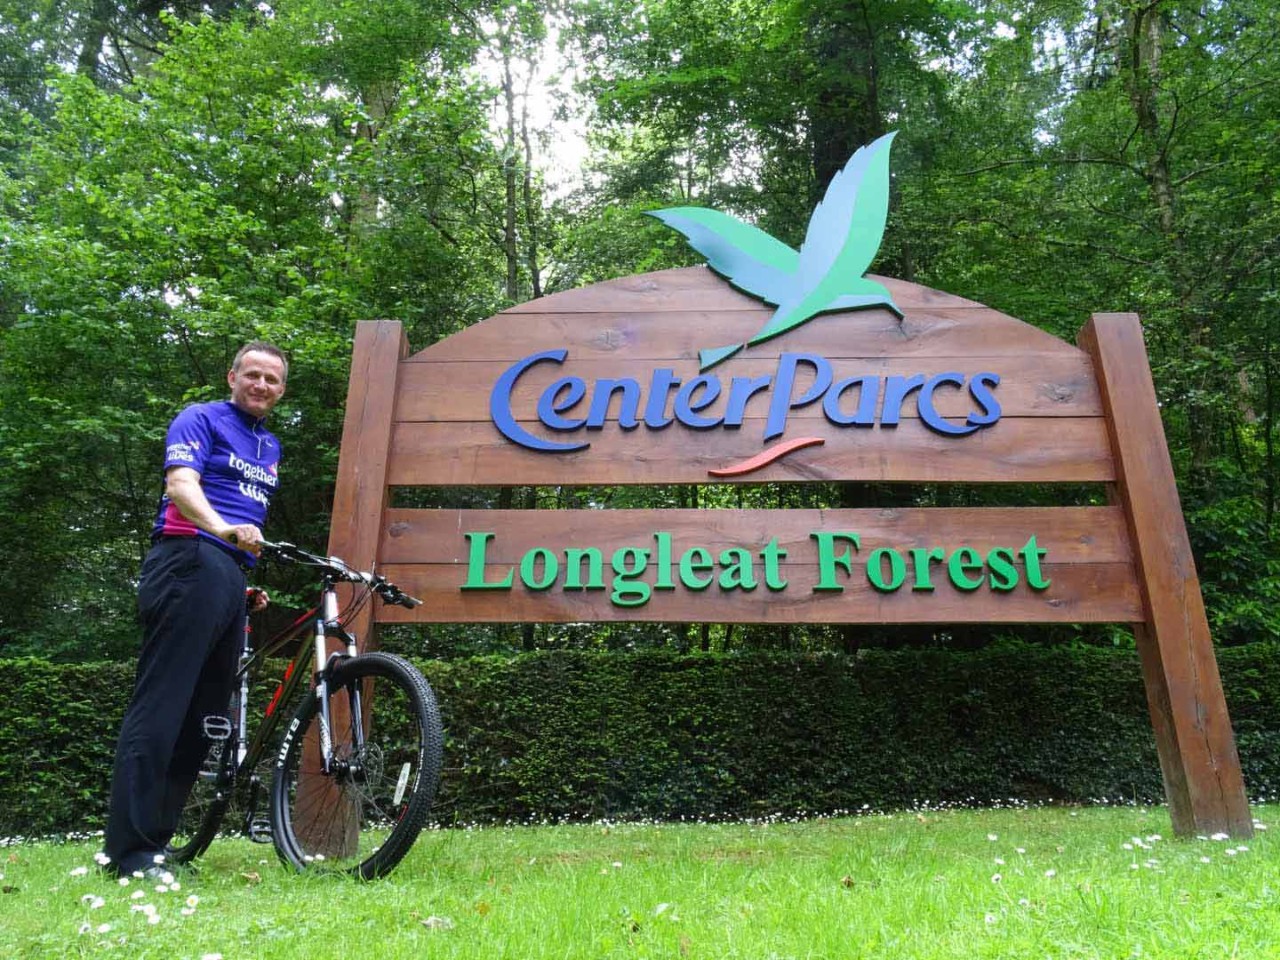 General manager of Longleat stood next to the Center Parcs welcome sign